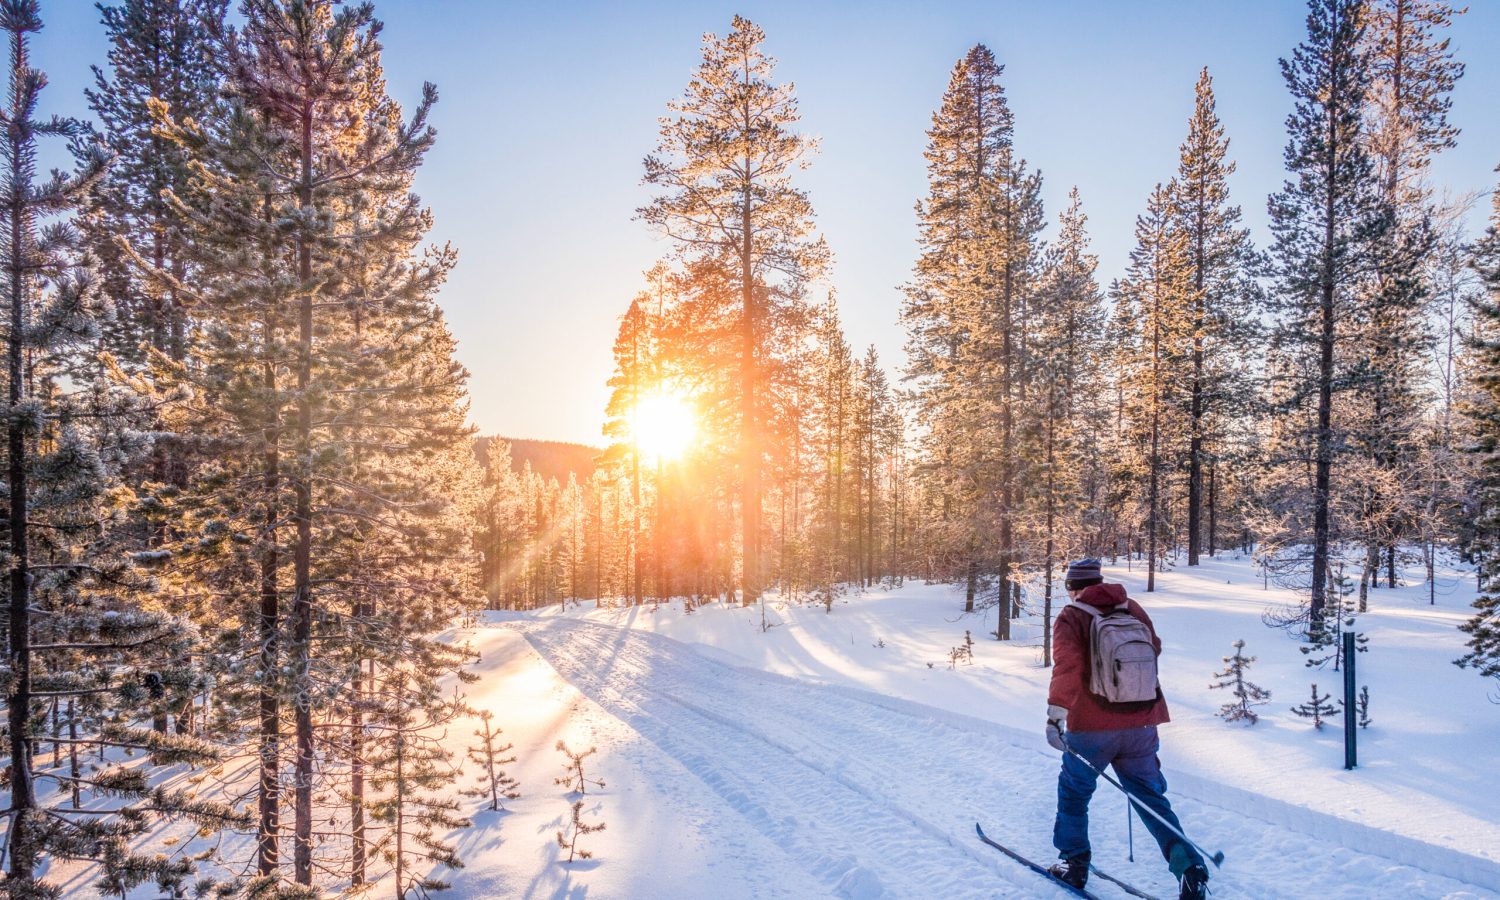 Panoramic view of man cross-country skiing on a track in beautiful winter wonderland scenery in Scandinavia with scenic evening light at sunset in winter, northern Europe